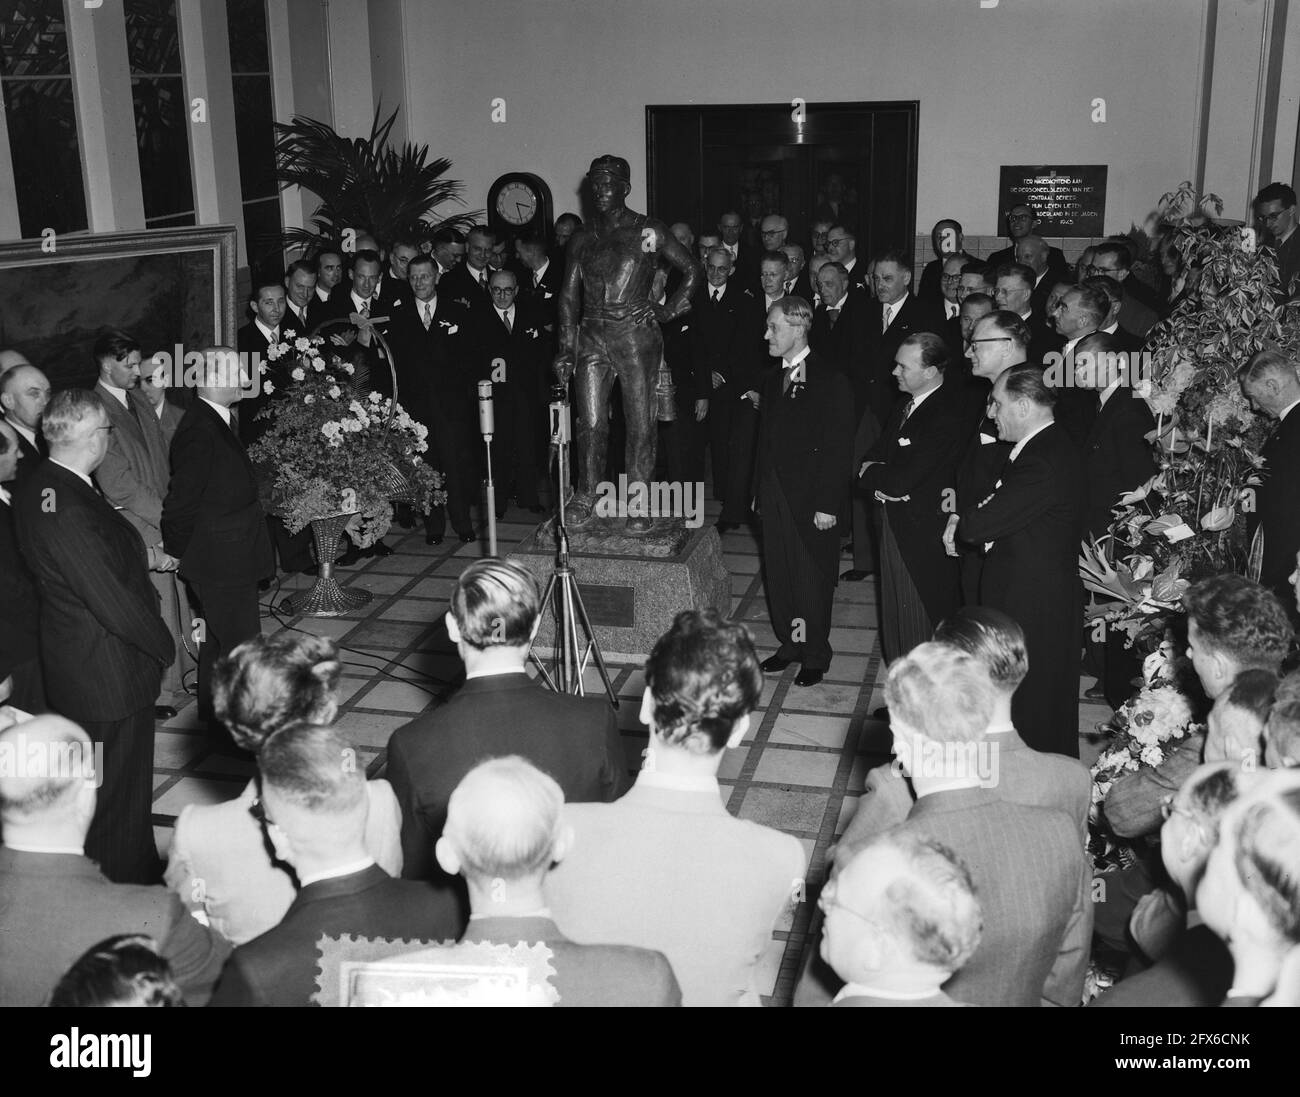 The Golden Jubilee of the State Mines in Limburg. A statue representing a miner was offered by the mine personnel. The unveiling of the statue made by the sculptor Melis. On the right, Dr. Ch. Th. Groothoff (President), May 8, 1952, SCHEDULE, STAATSMIJNEN, offers, jubilee, The Netherlands, 20th century press agency photo, news to remember, documentary, historic photography 1945-1990, visual stories, human history of the Twentieth Century, capturing moments in time Stock Photo